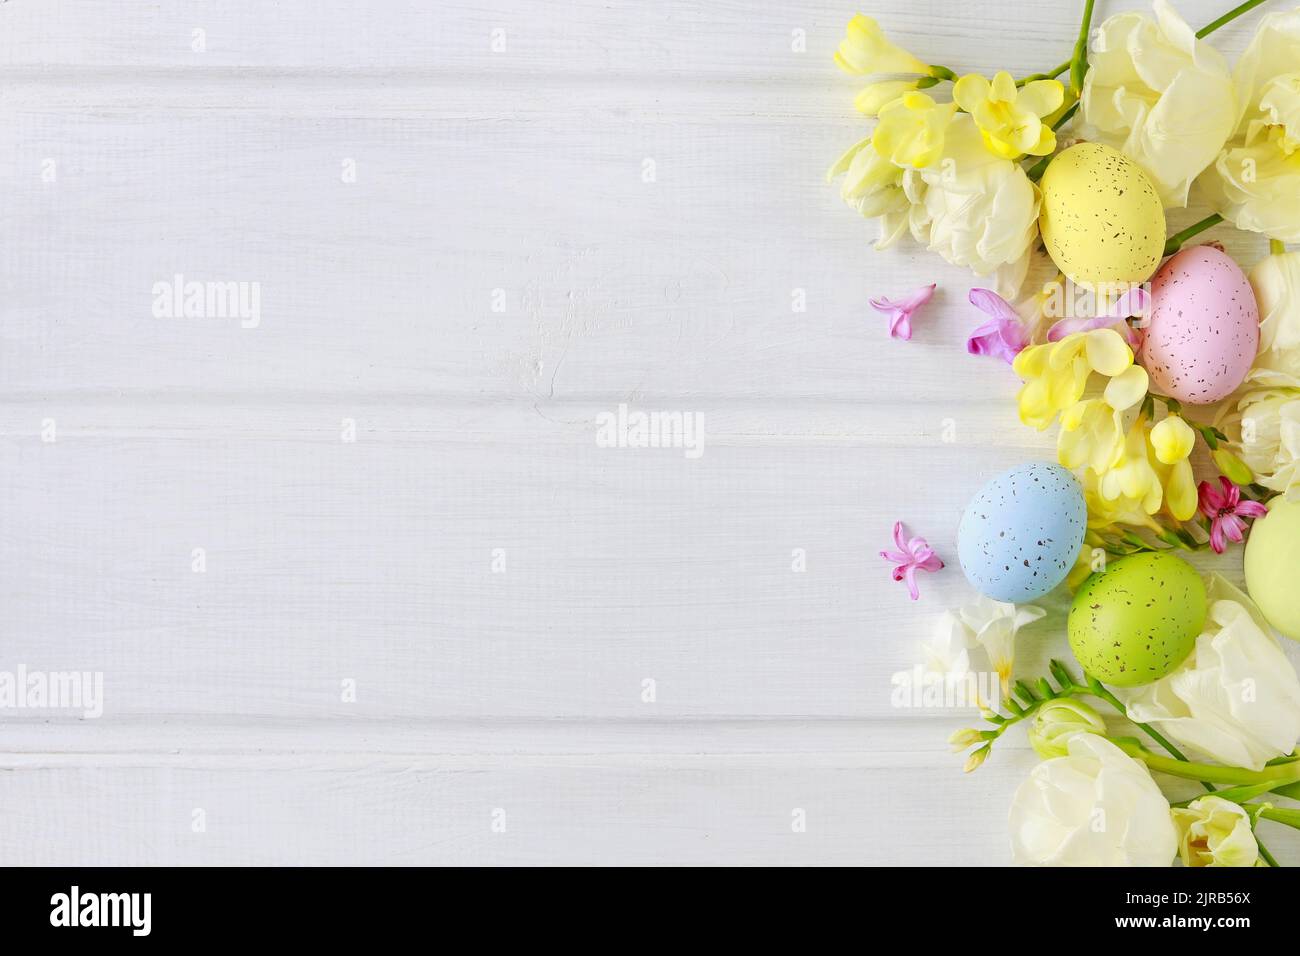 Tulips and freesias on white wooden table. Easter eggs among flowers, copy space. Stock Photo